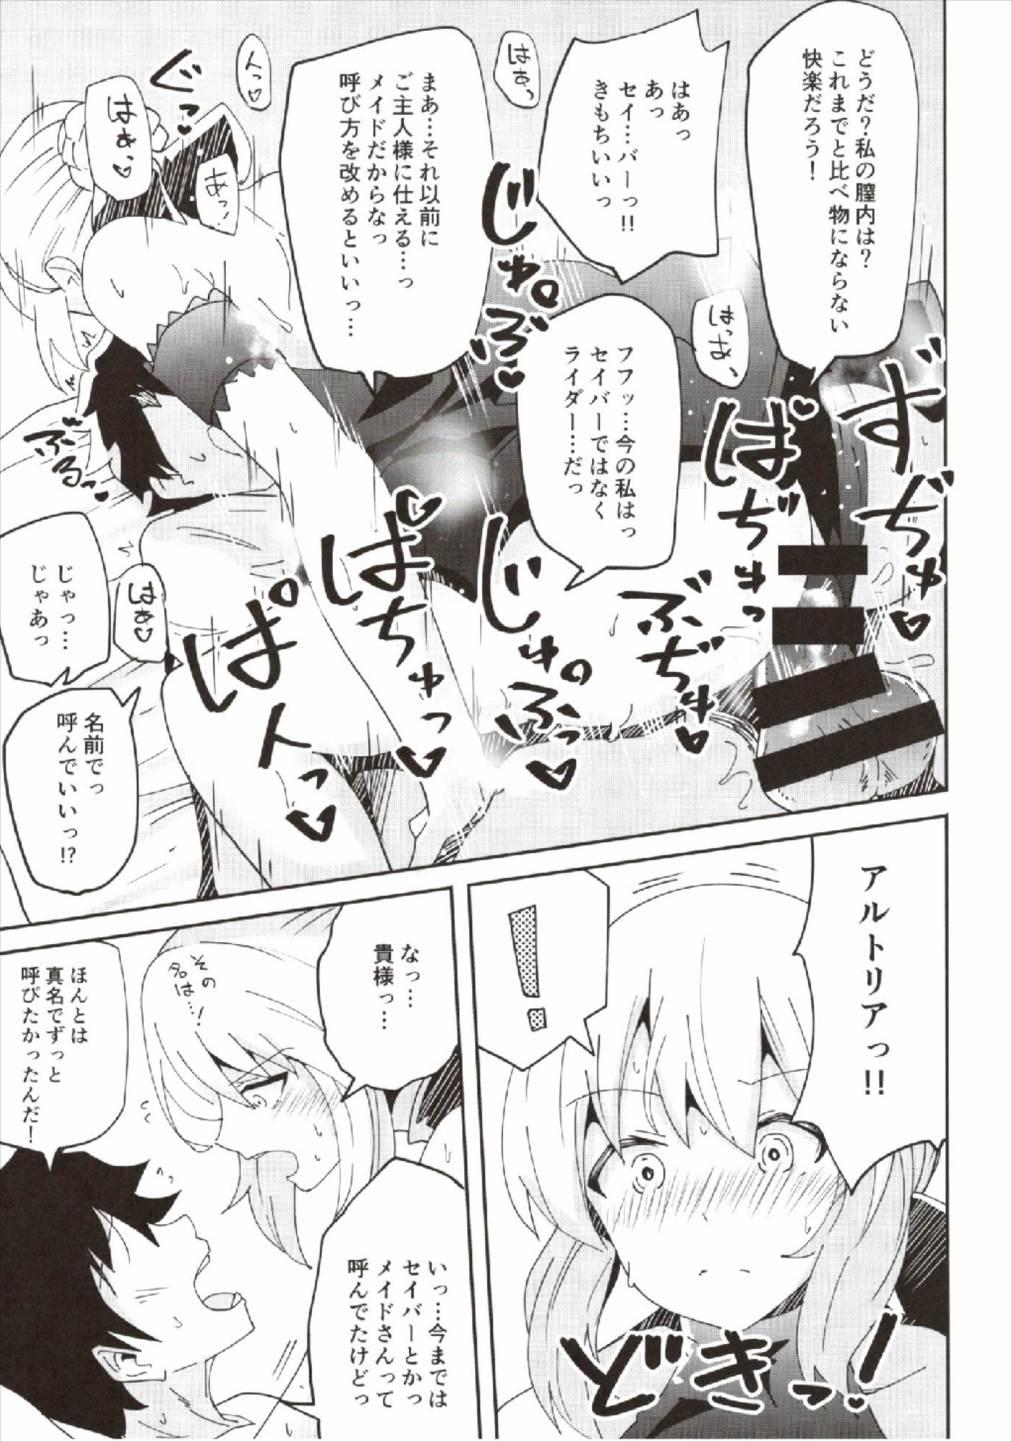 Gayemo Dosukebe Saber Wars 2 - Fate grand order Femdom Clips - Page 13